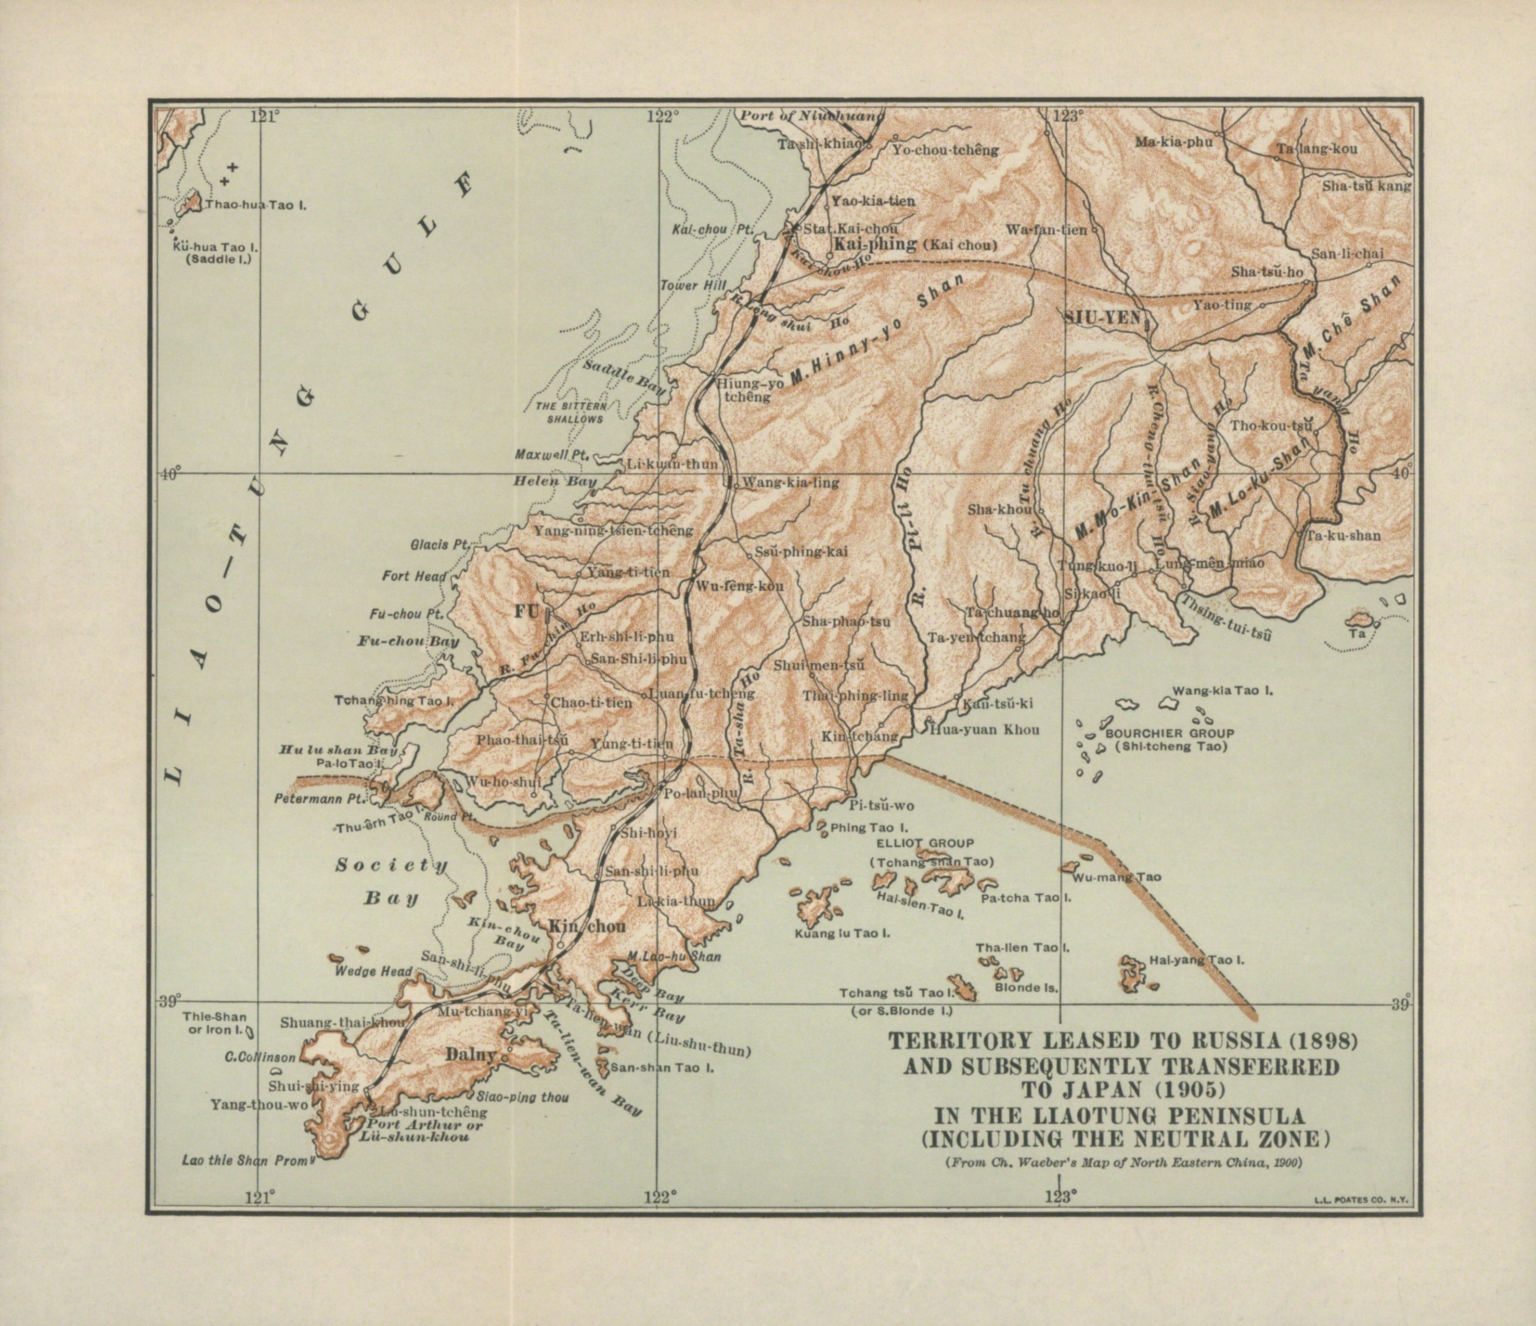 Territory leased to Russia (1898) and subsequently transferred to Japan (1905) in the Liaotung Peninsula (including the neutral zone) : (from Ch. Waeber's Map of North Eastern China, 1900).